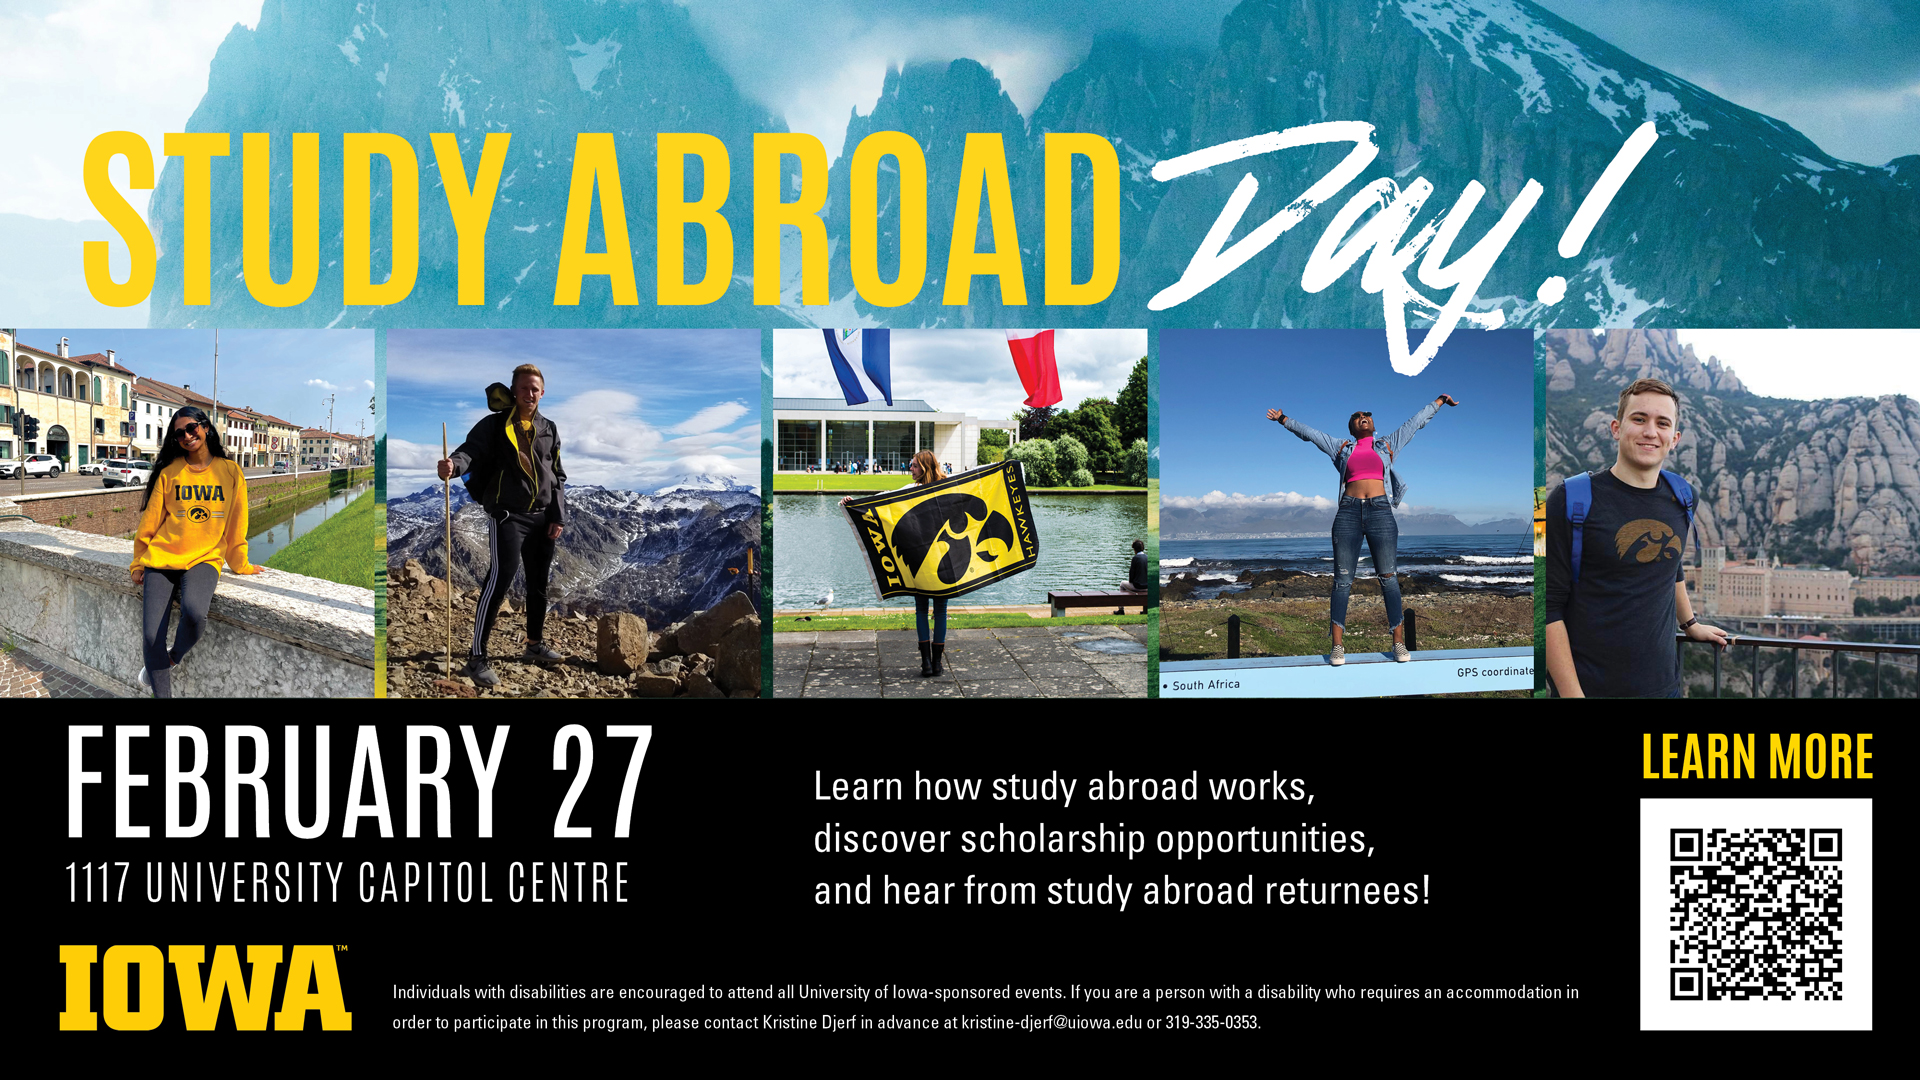 Study Abroad Day! Learn how study abroad works, discover scholarship opportunities and hear from returnees! February 27th, 1117 University Capitol Centre